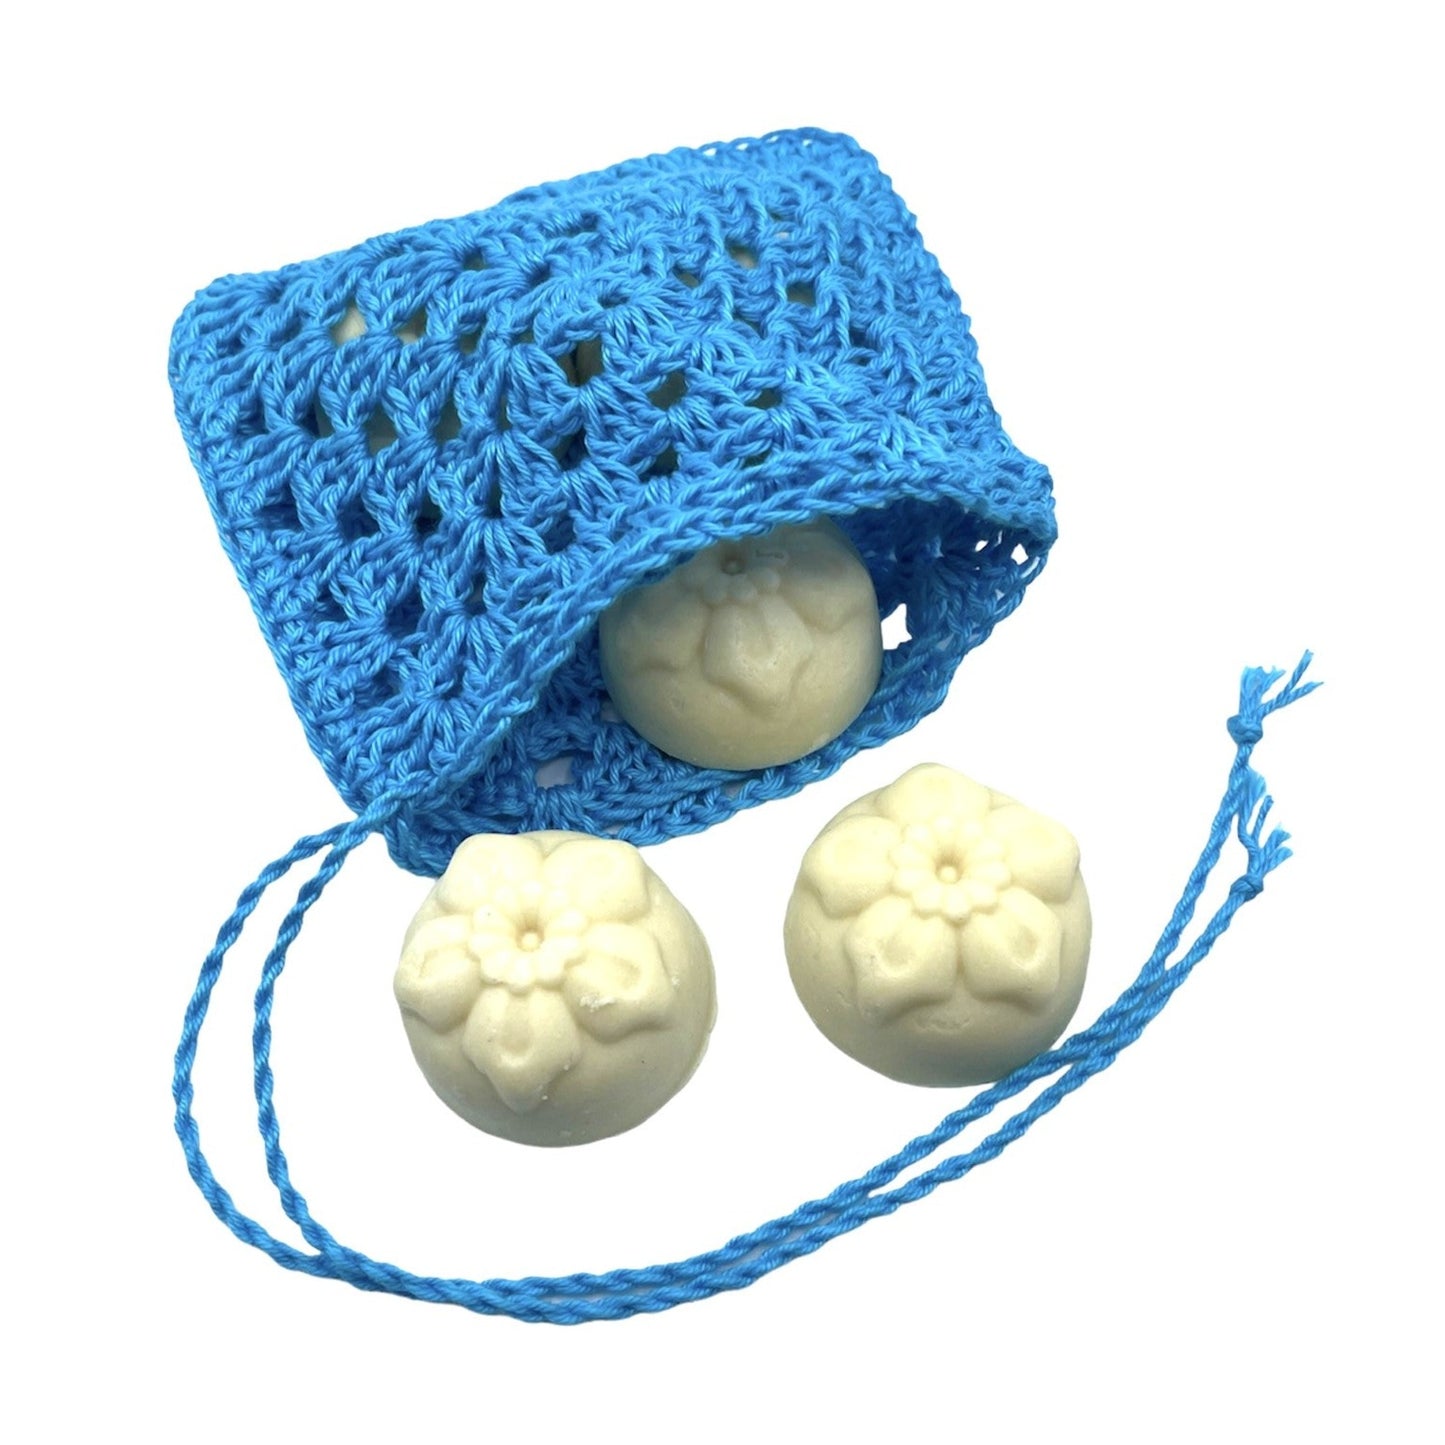 Bath pralines with small crocheted bag